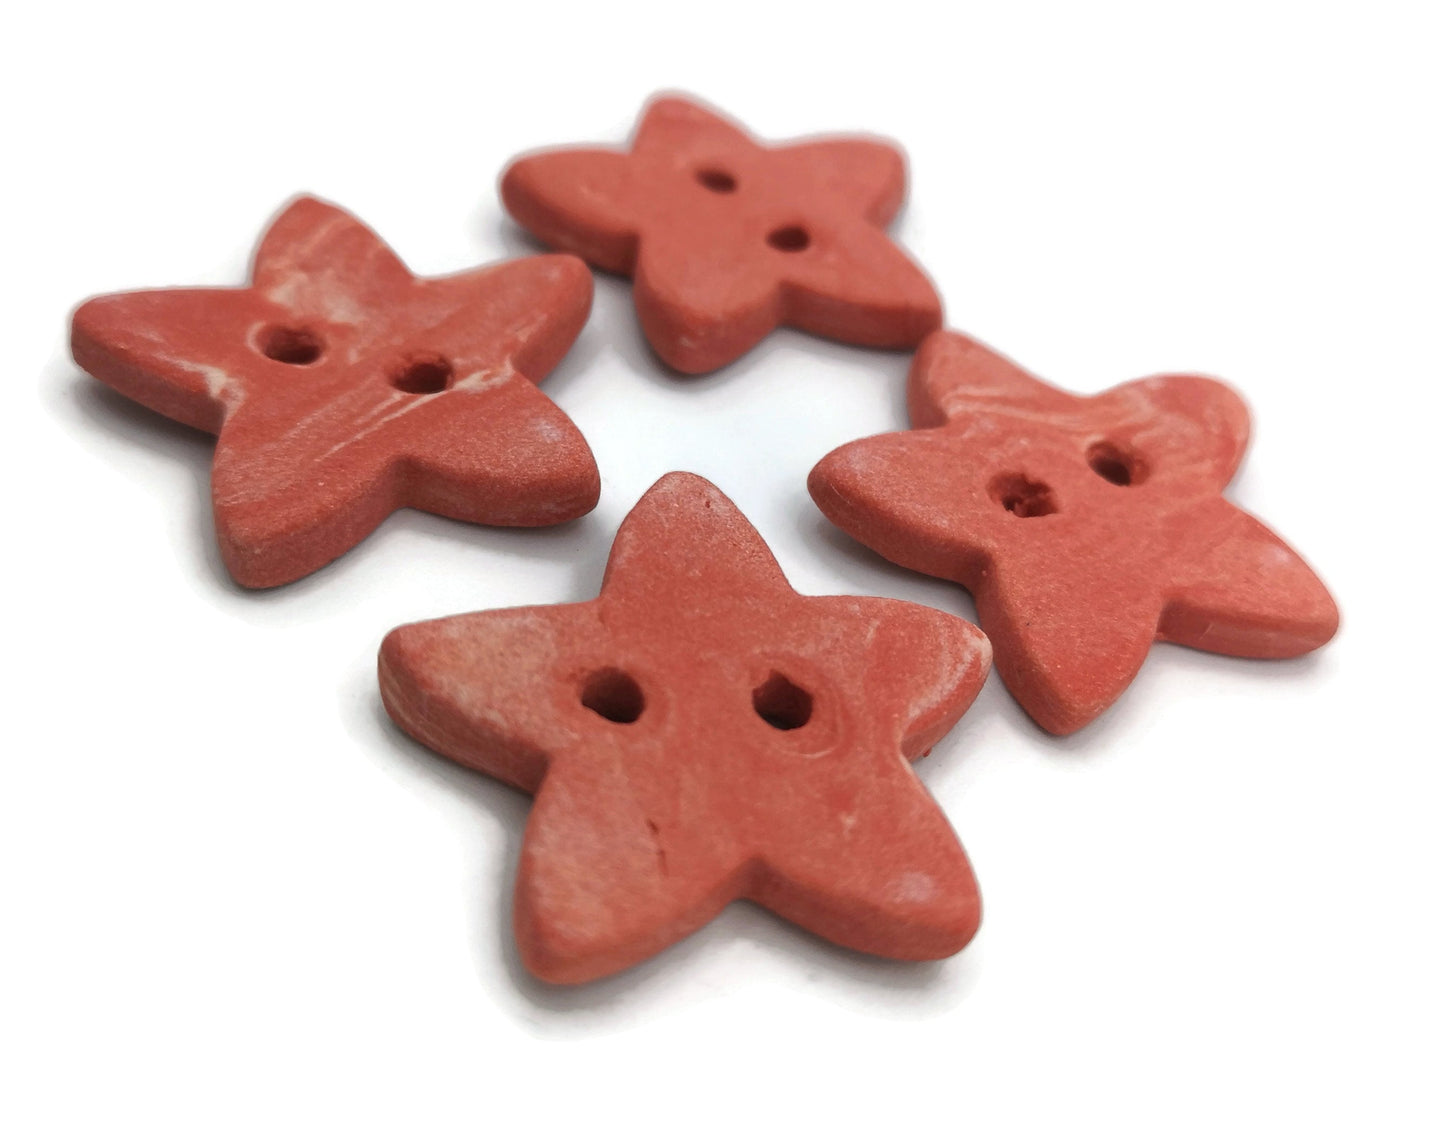 4Pc 25mm Handmade Ceramic Large Sewing Buttons Matte Red Star Shaped, Cute Sewing Supplies And Notions - Ceramica Ana Rafael